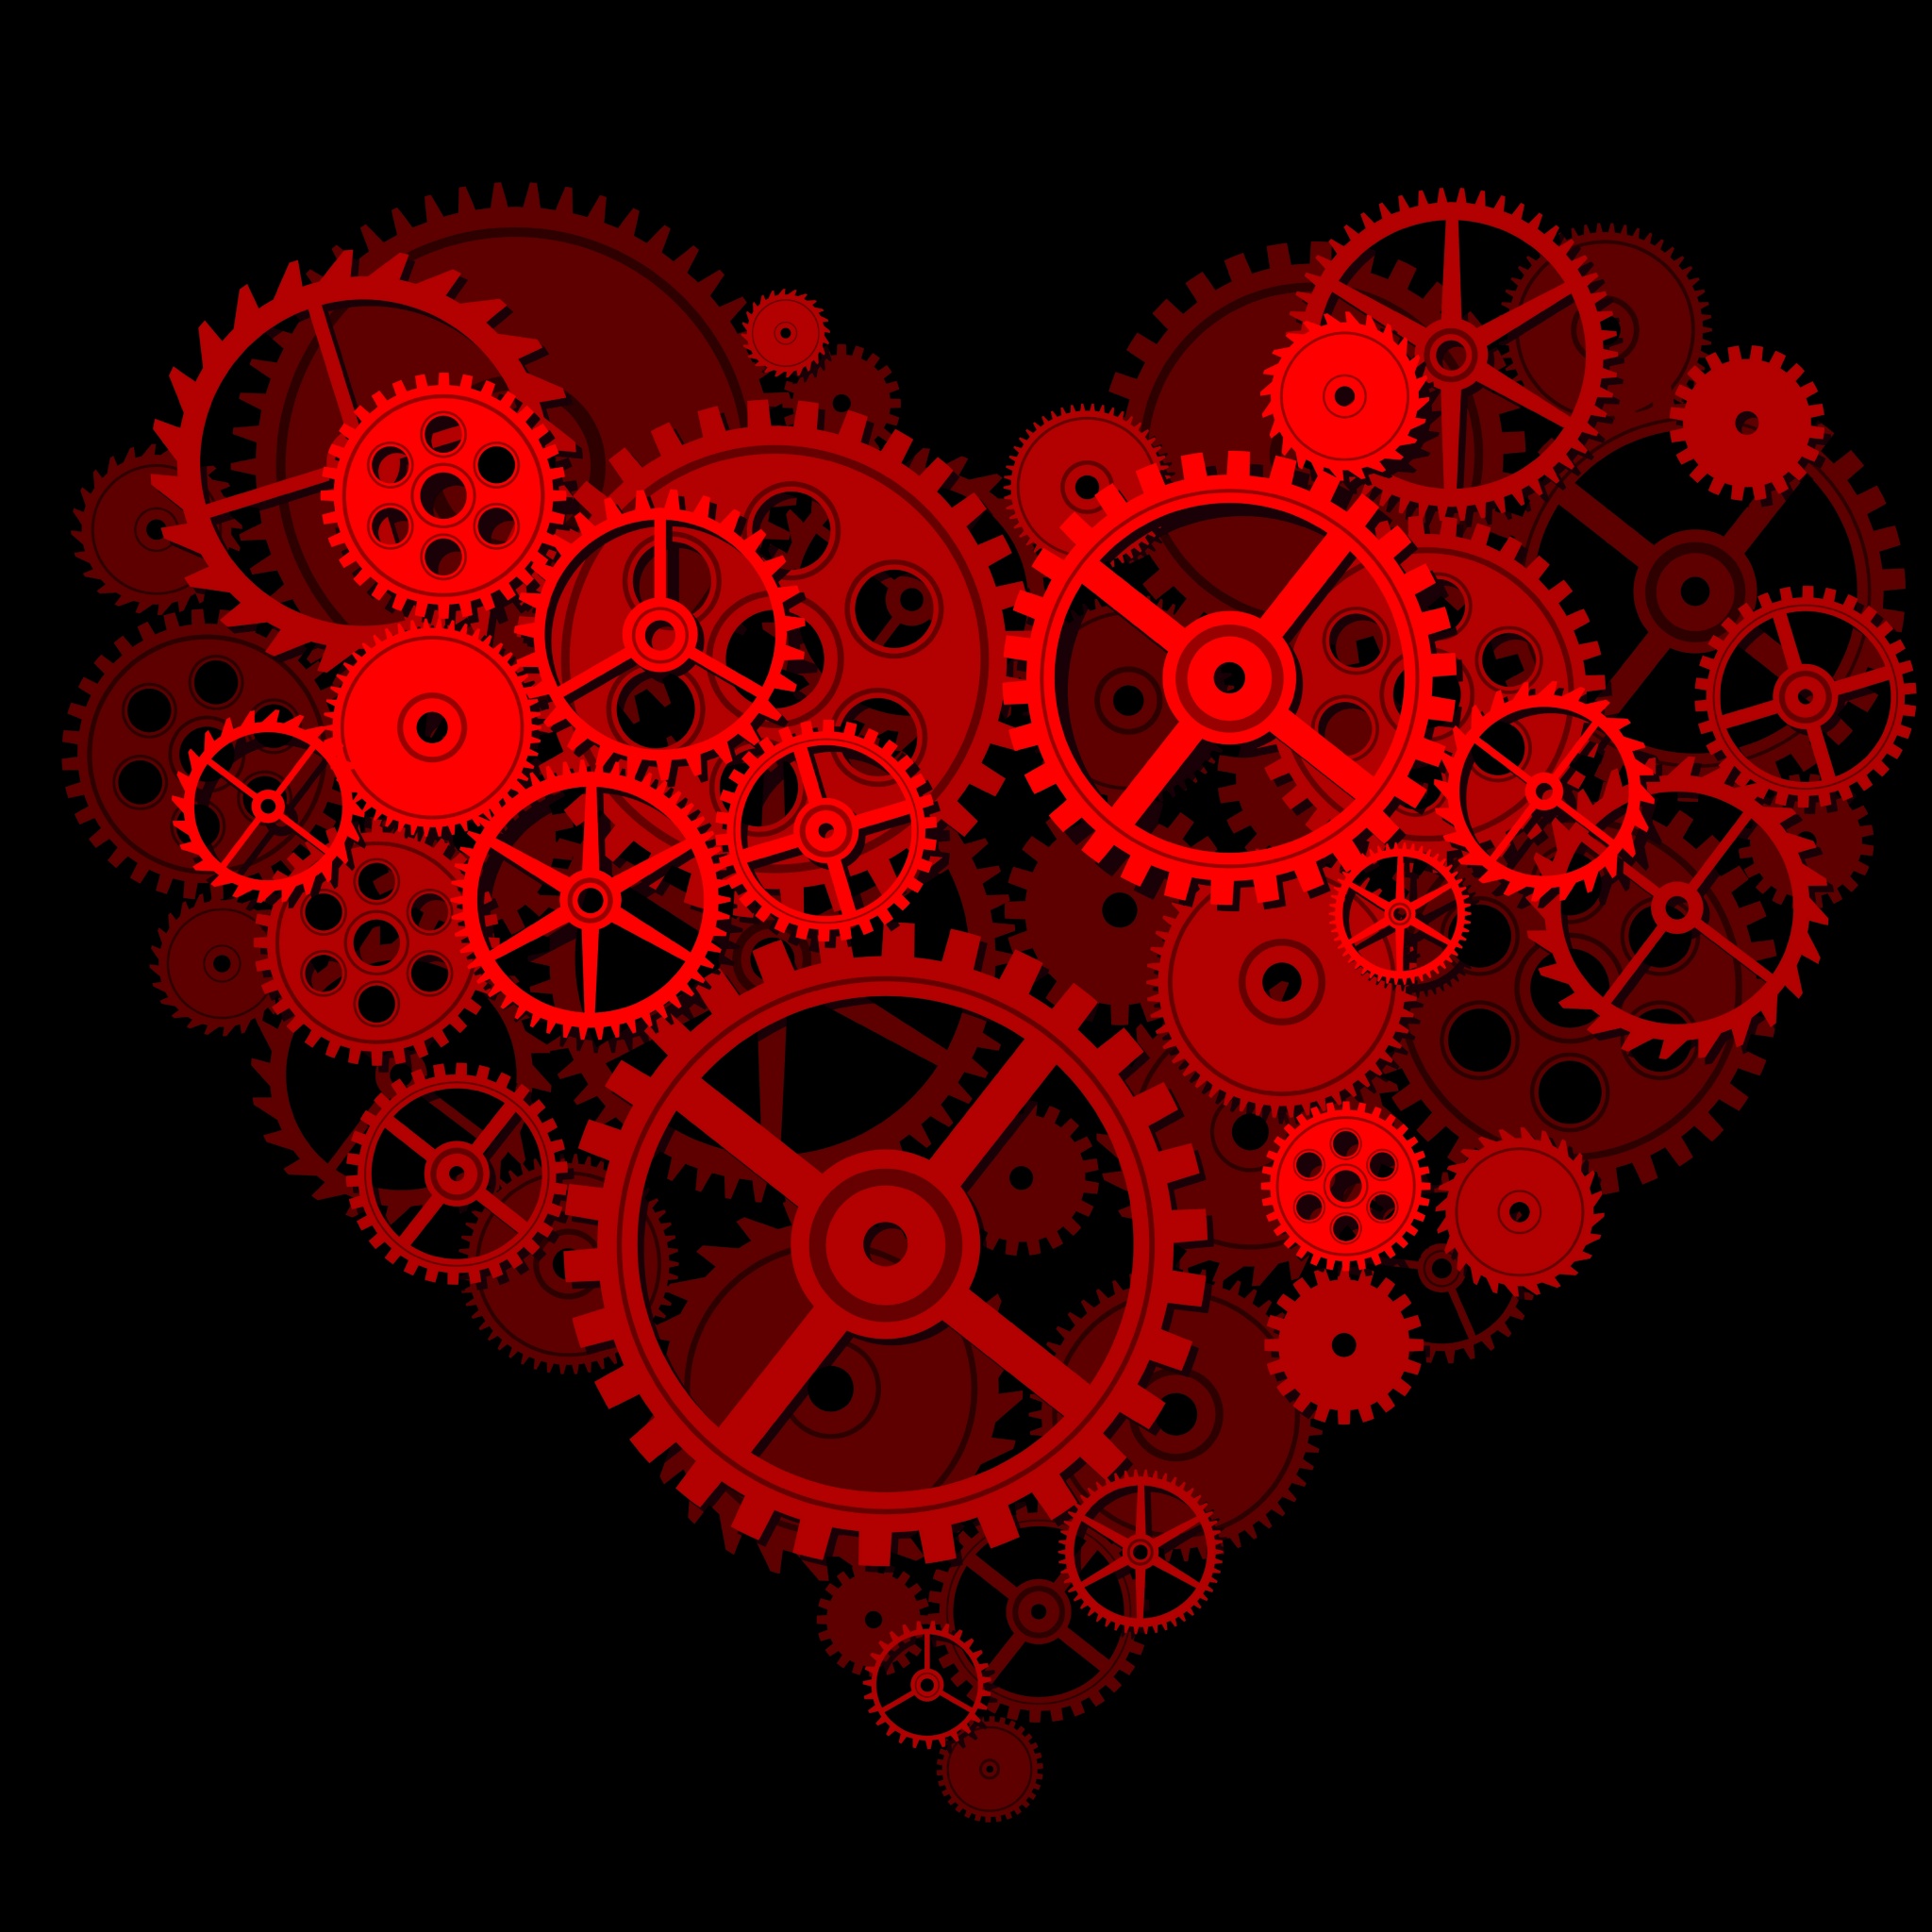 Black And Red Heart Wallpaper 61 images